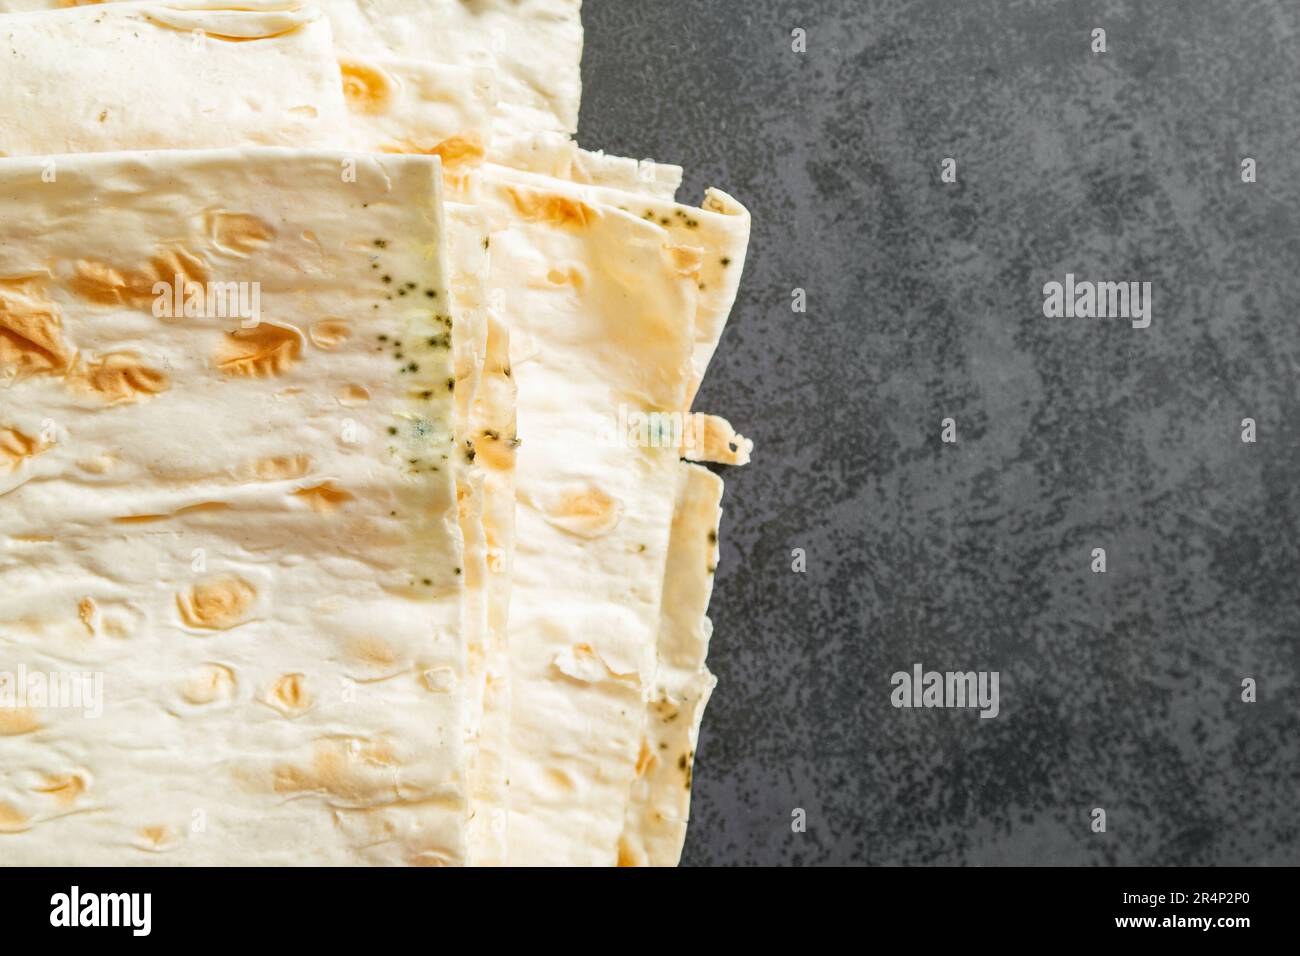 Spoiled pita, moldy. Mildew on the bread. Gray background. copy space Stock Photo